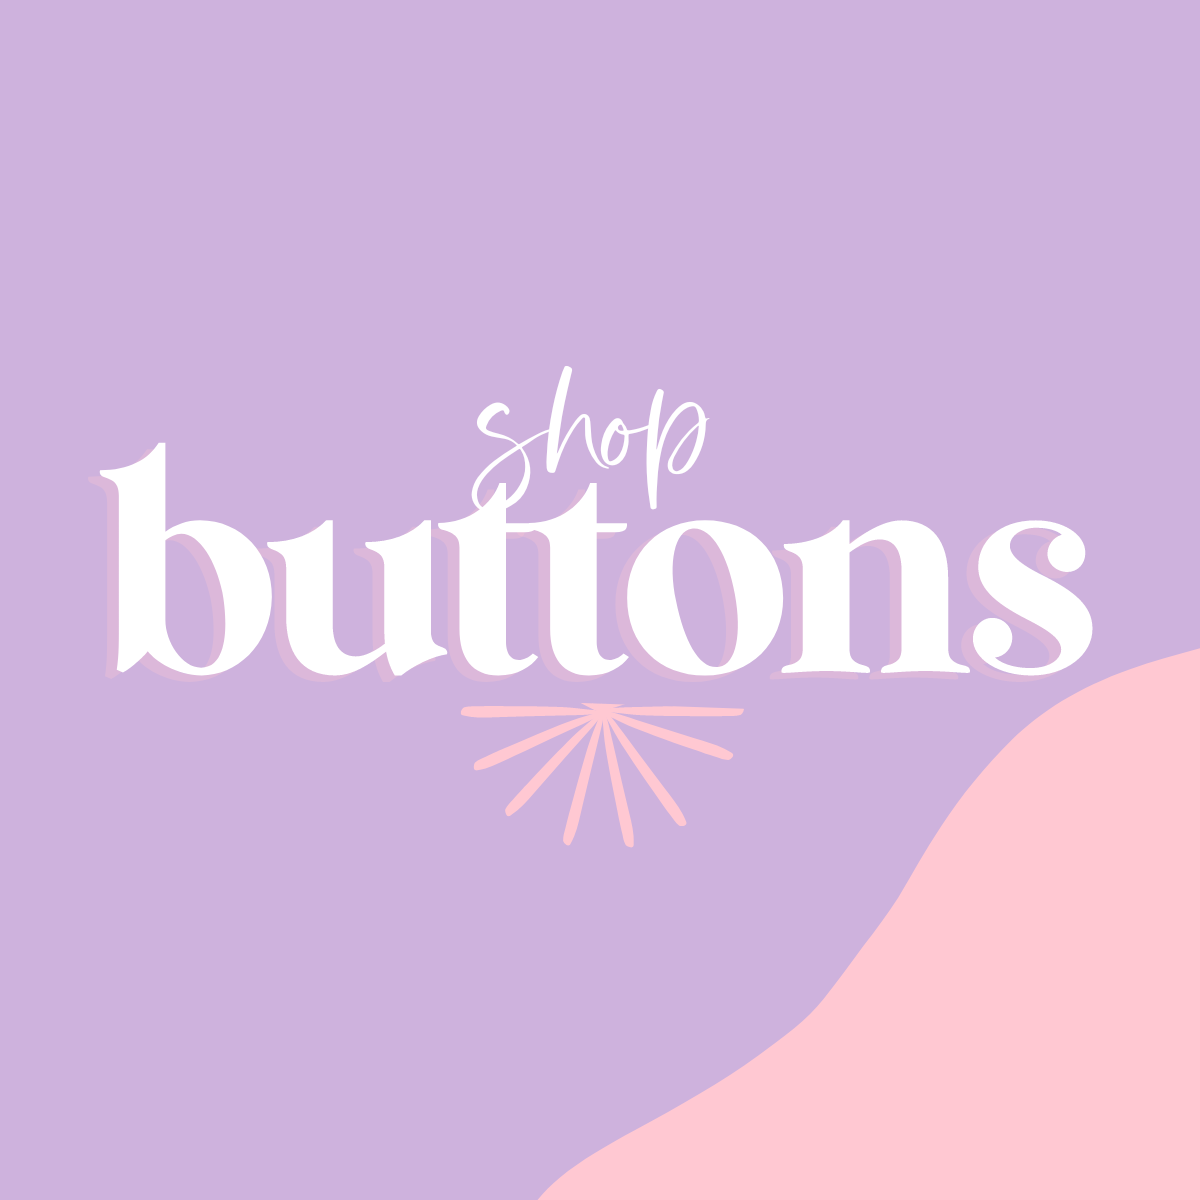 All Buttons